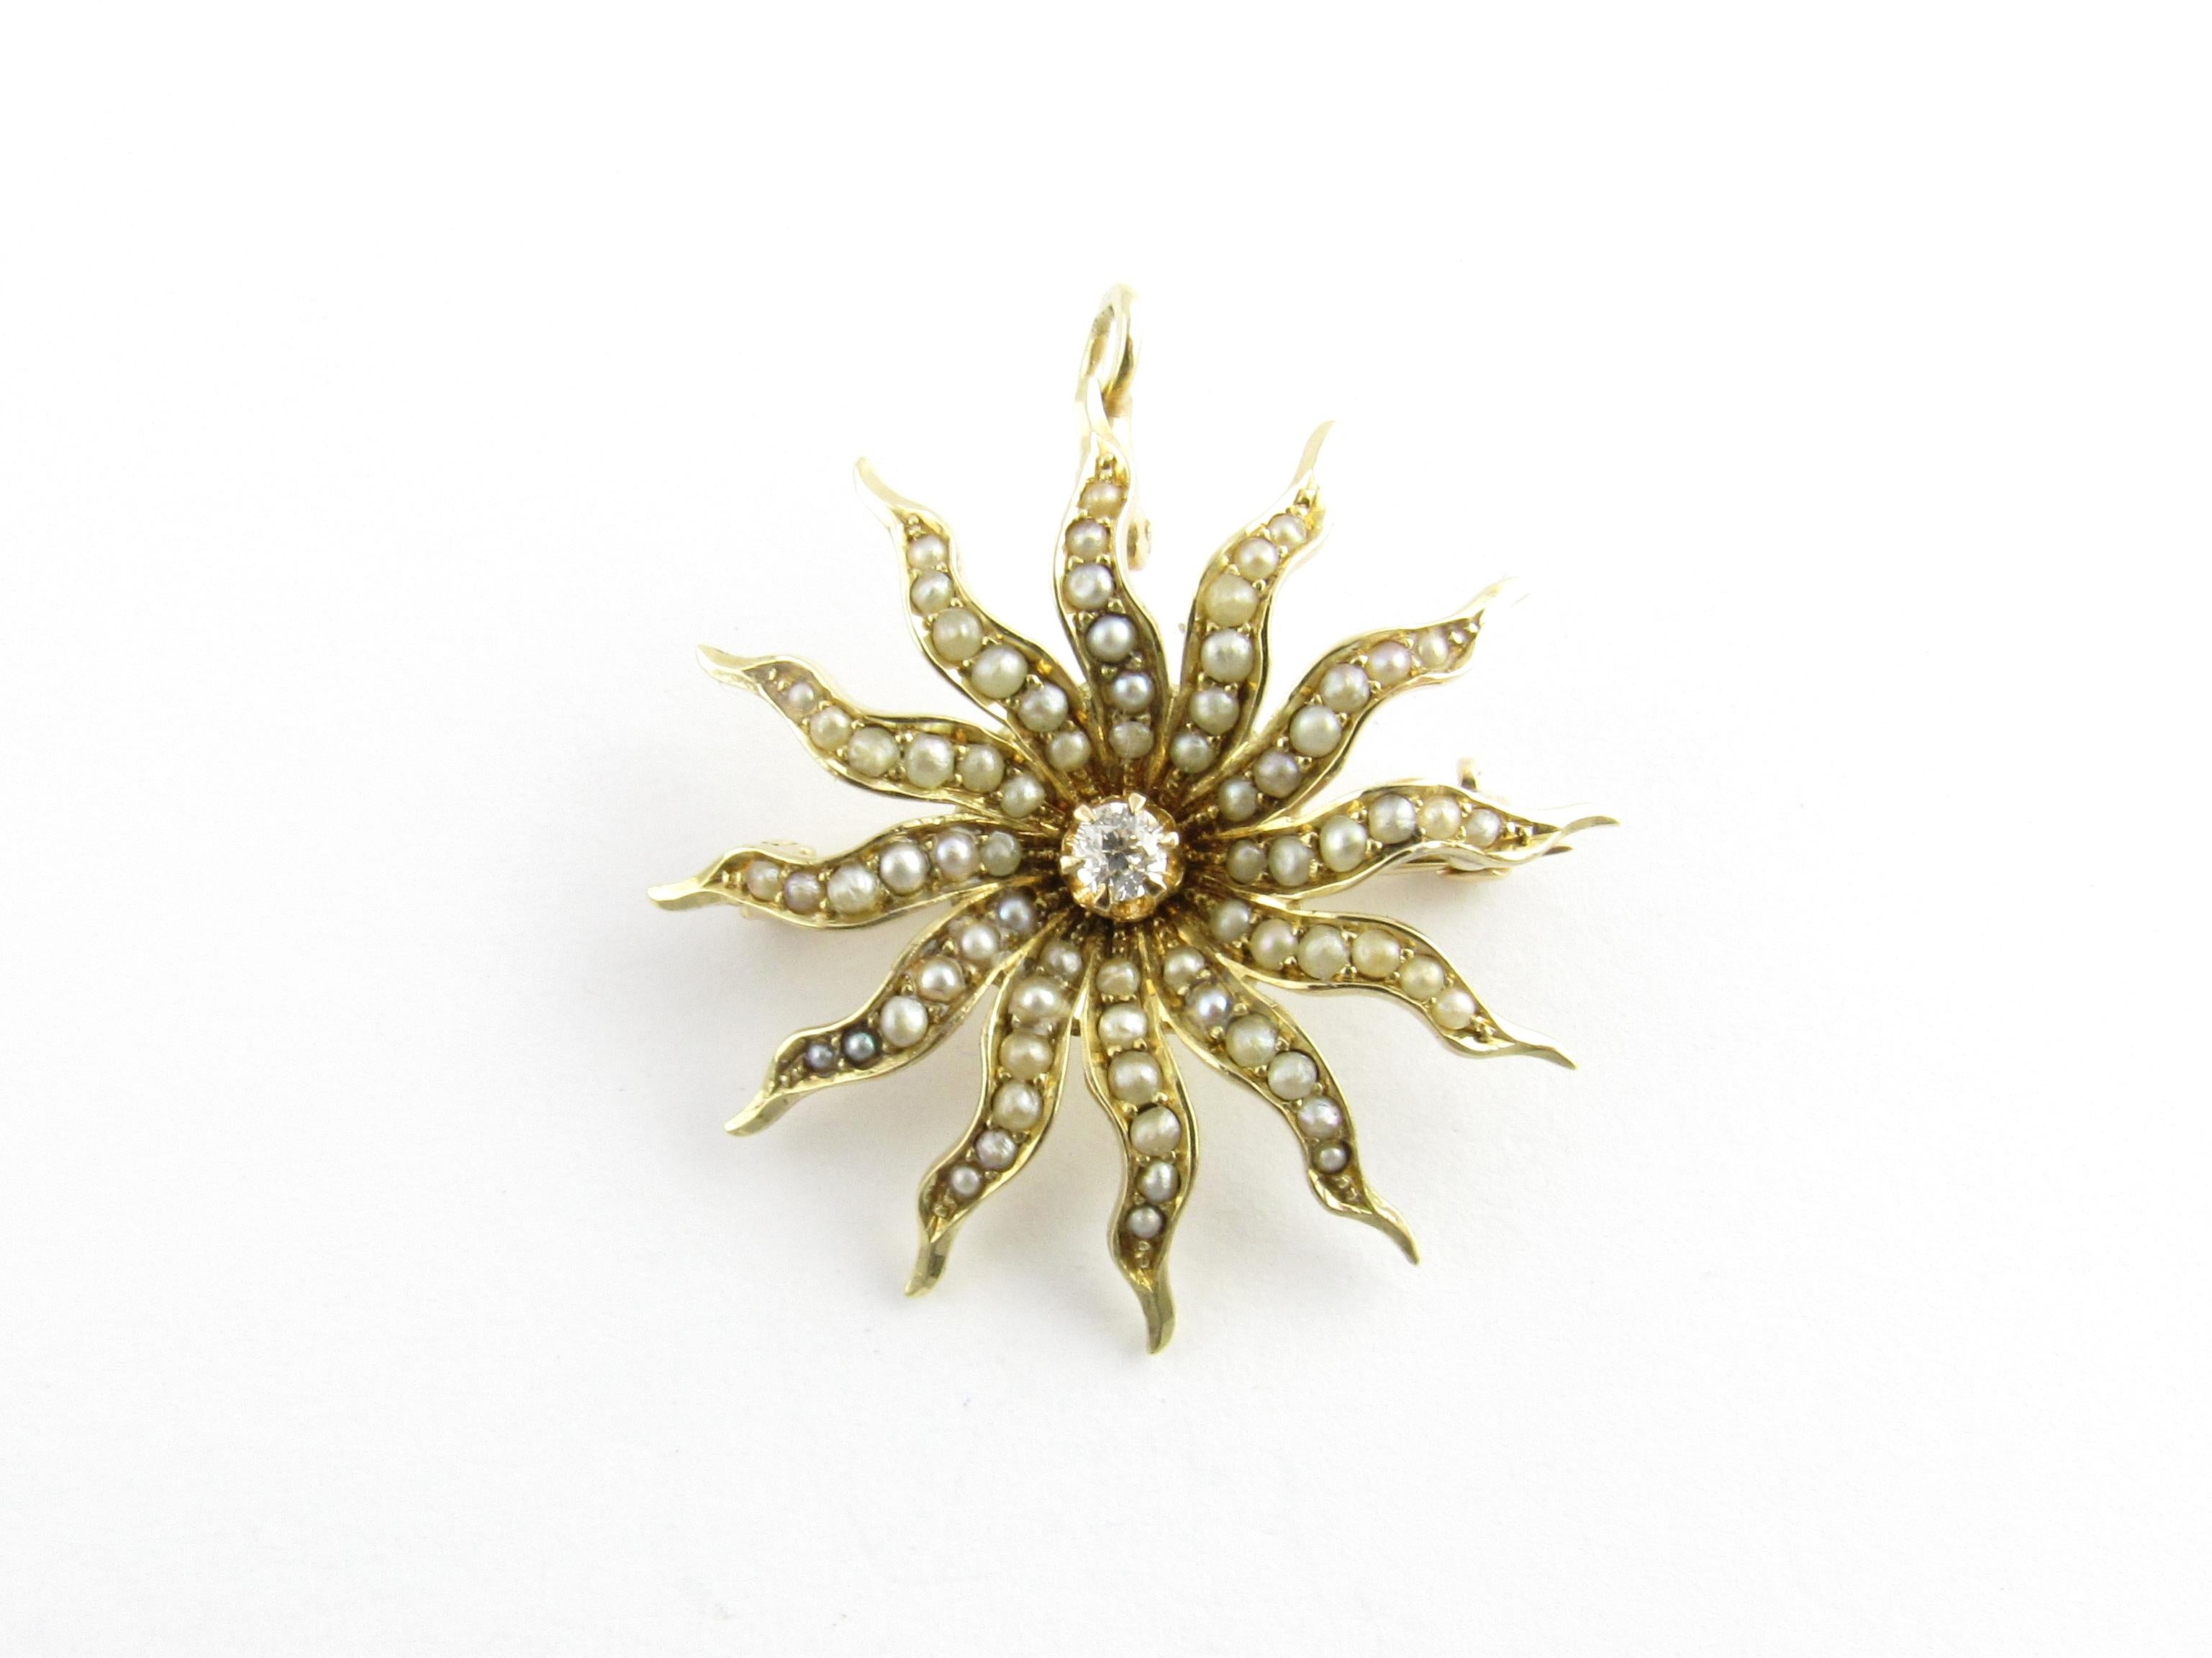 Vintage 14 Karat Yellow Gold Seed Pearl and Diamond Brooch/Pendant

This elegant brooch features 72 seed pearls and one round European cut diamond set in a lovely floral design. Can be worn as a brooch or a pendant.

Approximate total diamond